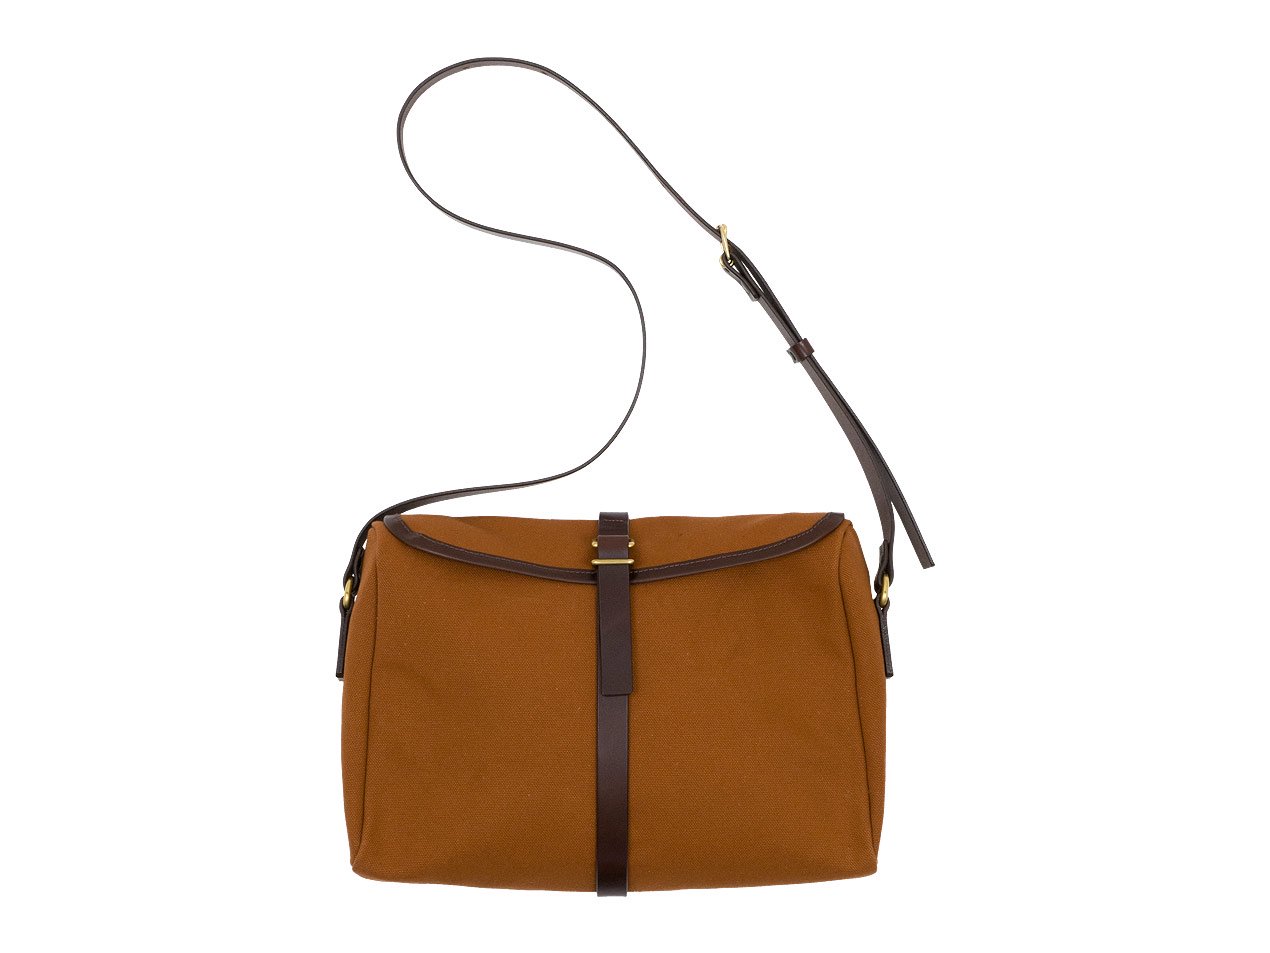 SOUTHERN FiELD INDUSTRiES Satchel PersimmonChocolate